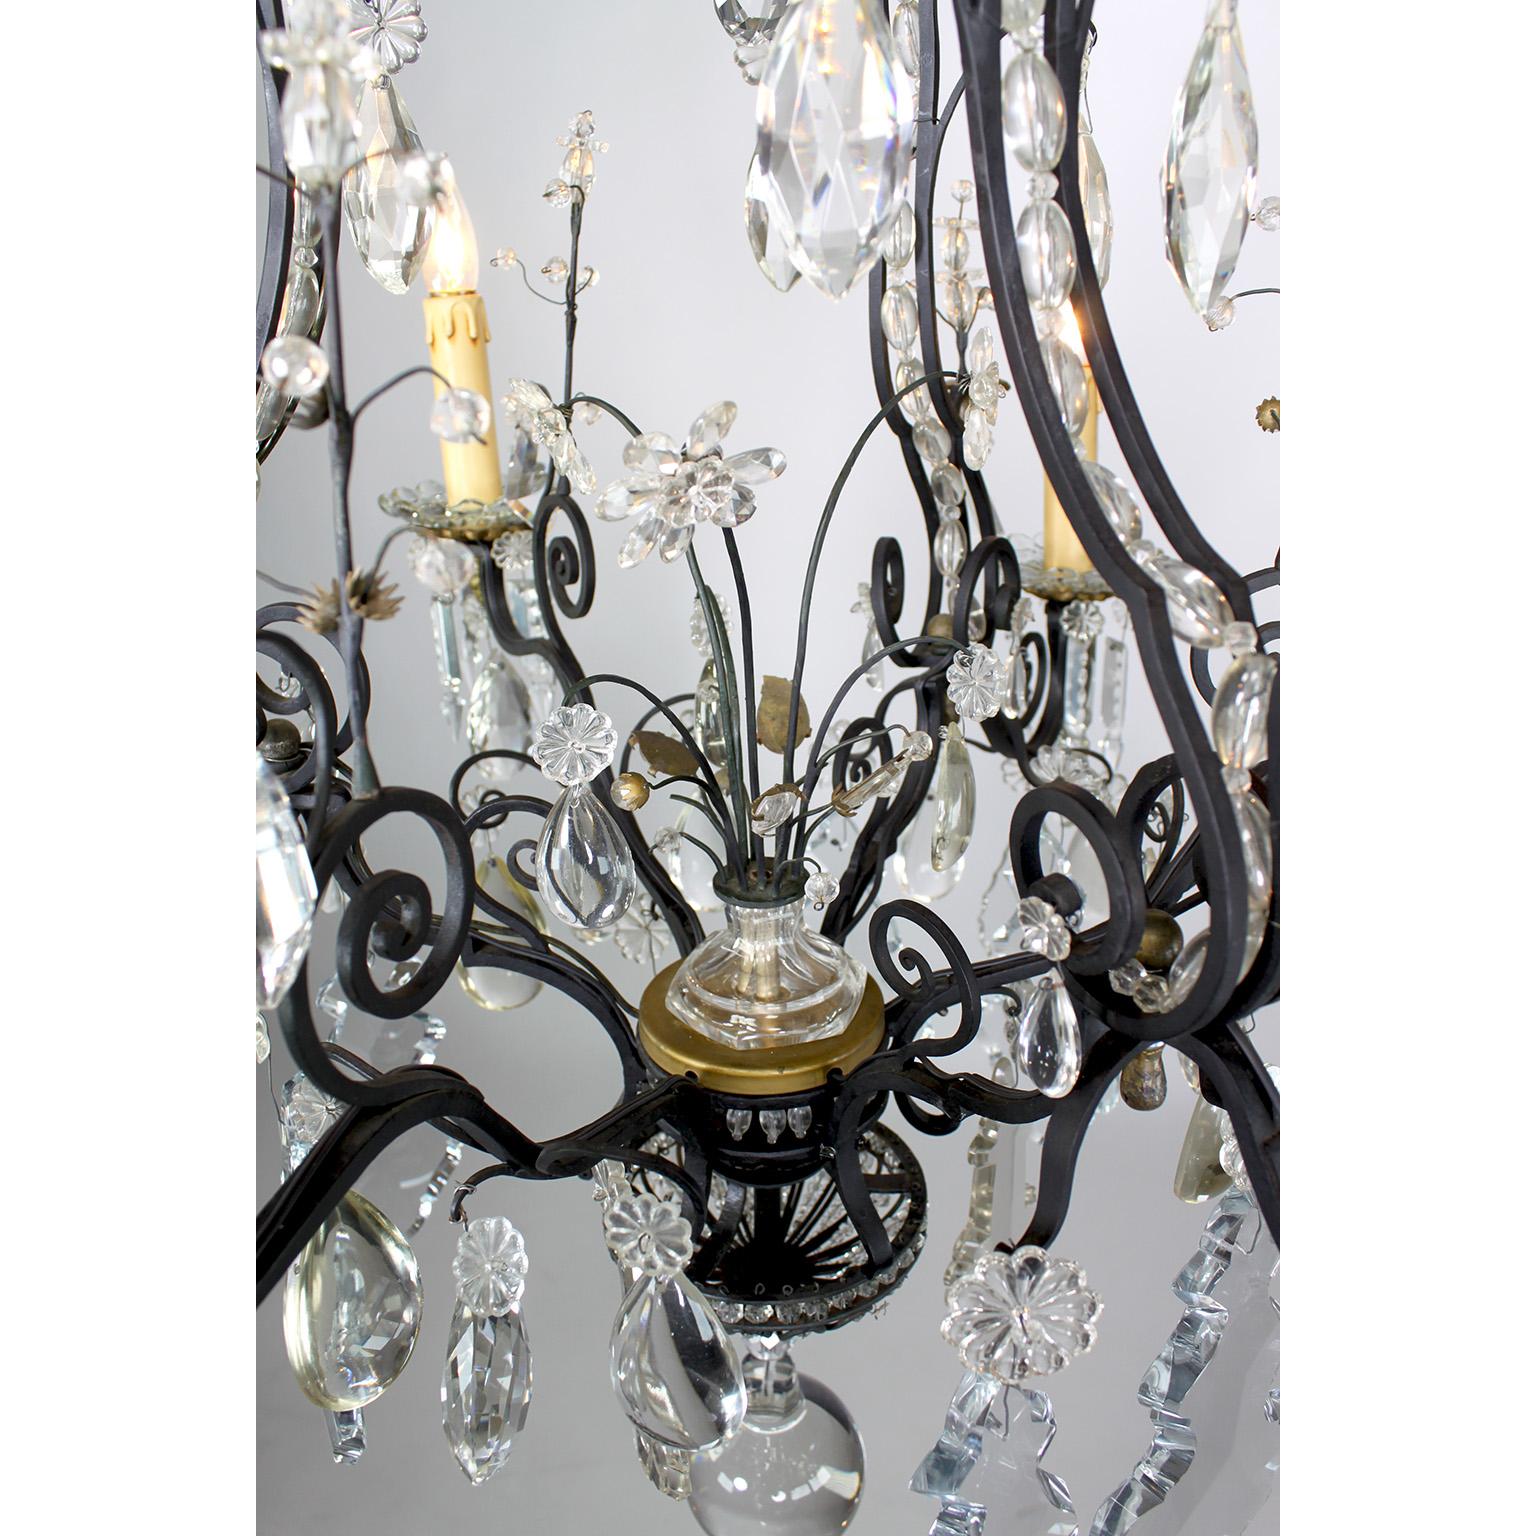 Early 20th Century French Louis XV Style Cut-Glass, Wrought Iron and Parcel-Gilt 6 Light Chandelier For Sale